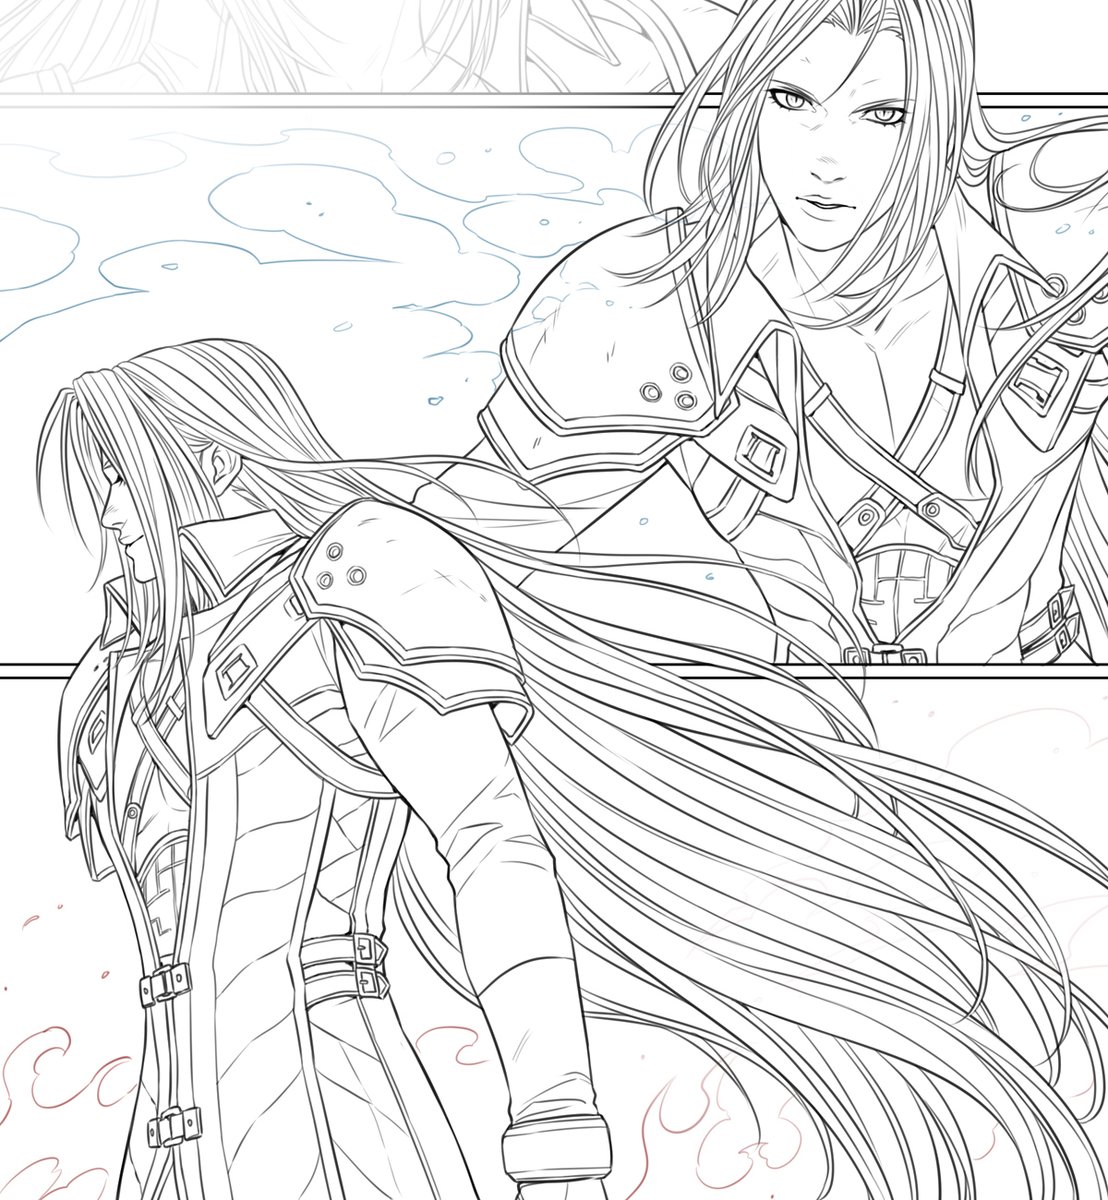 drawing Sephiroth's hair is my personal little hell ~(>_<~) ahahah but I love it~ ♡ <wip>